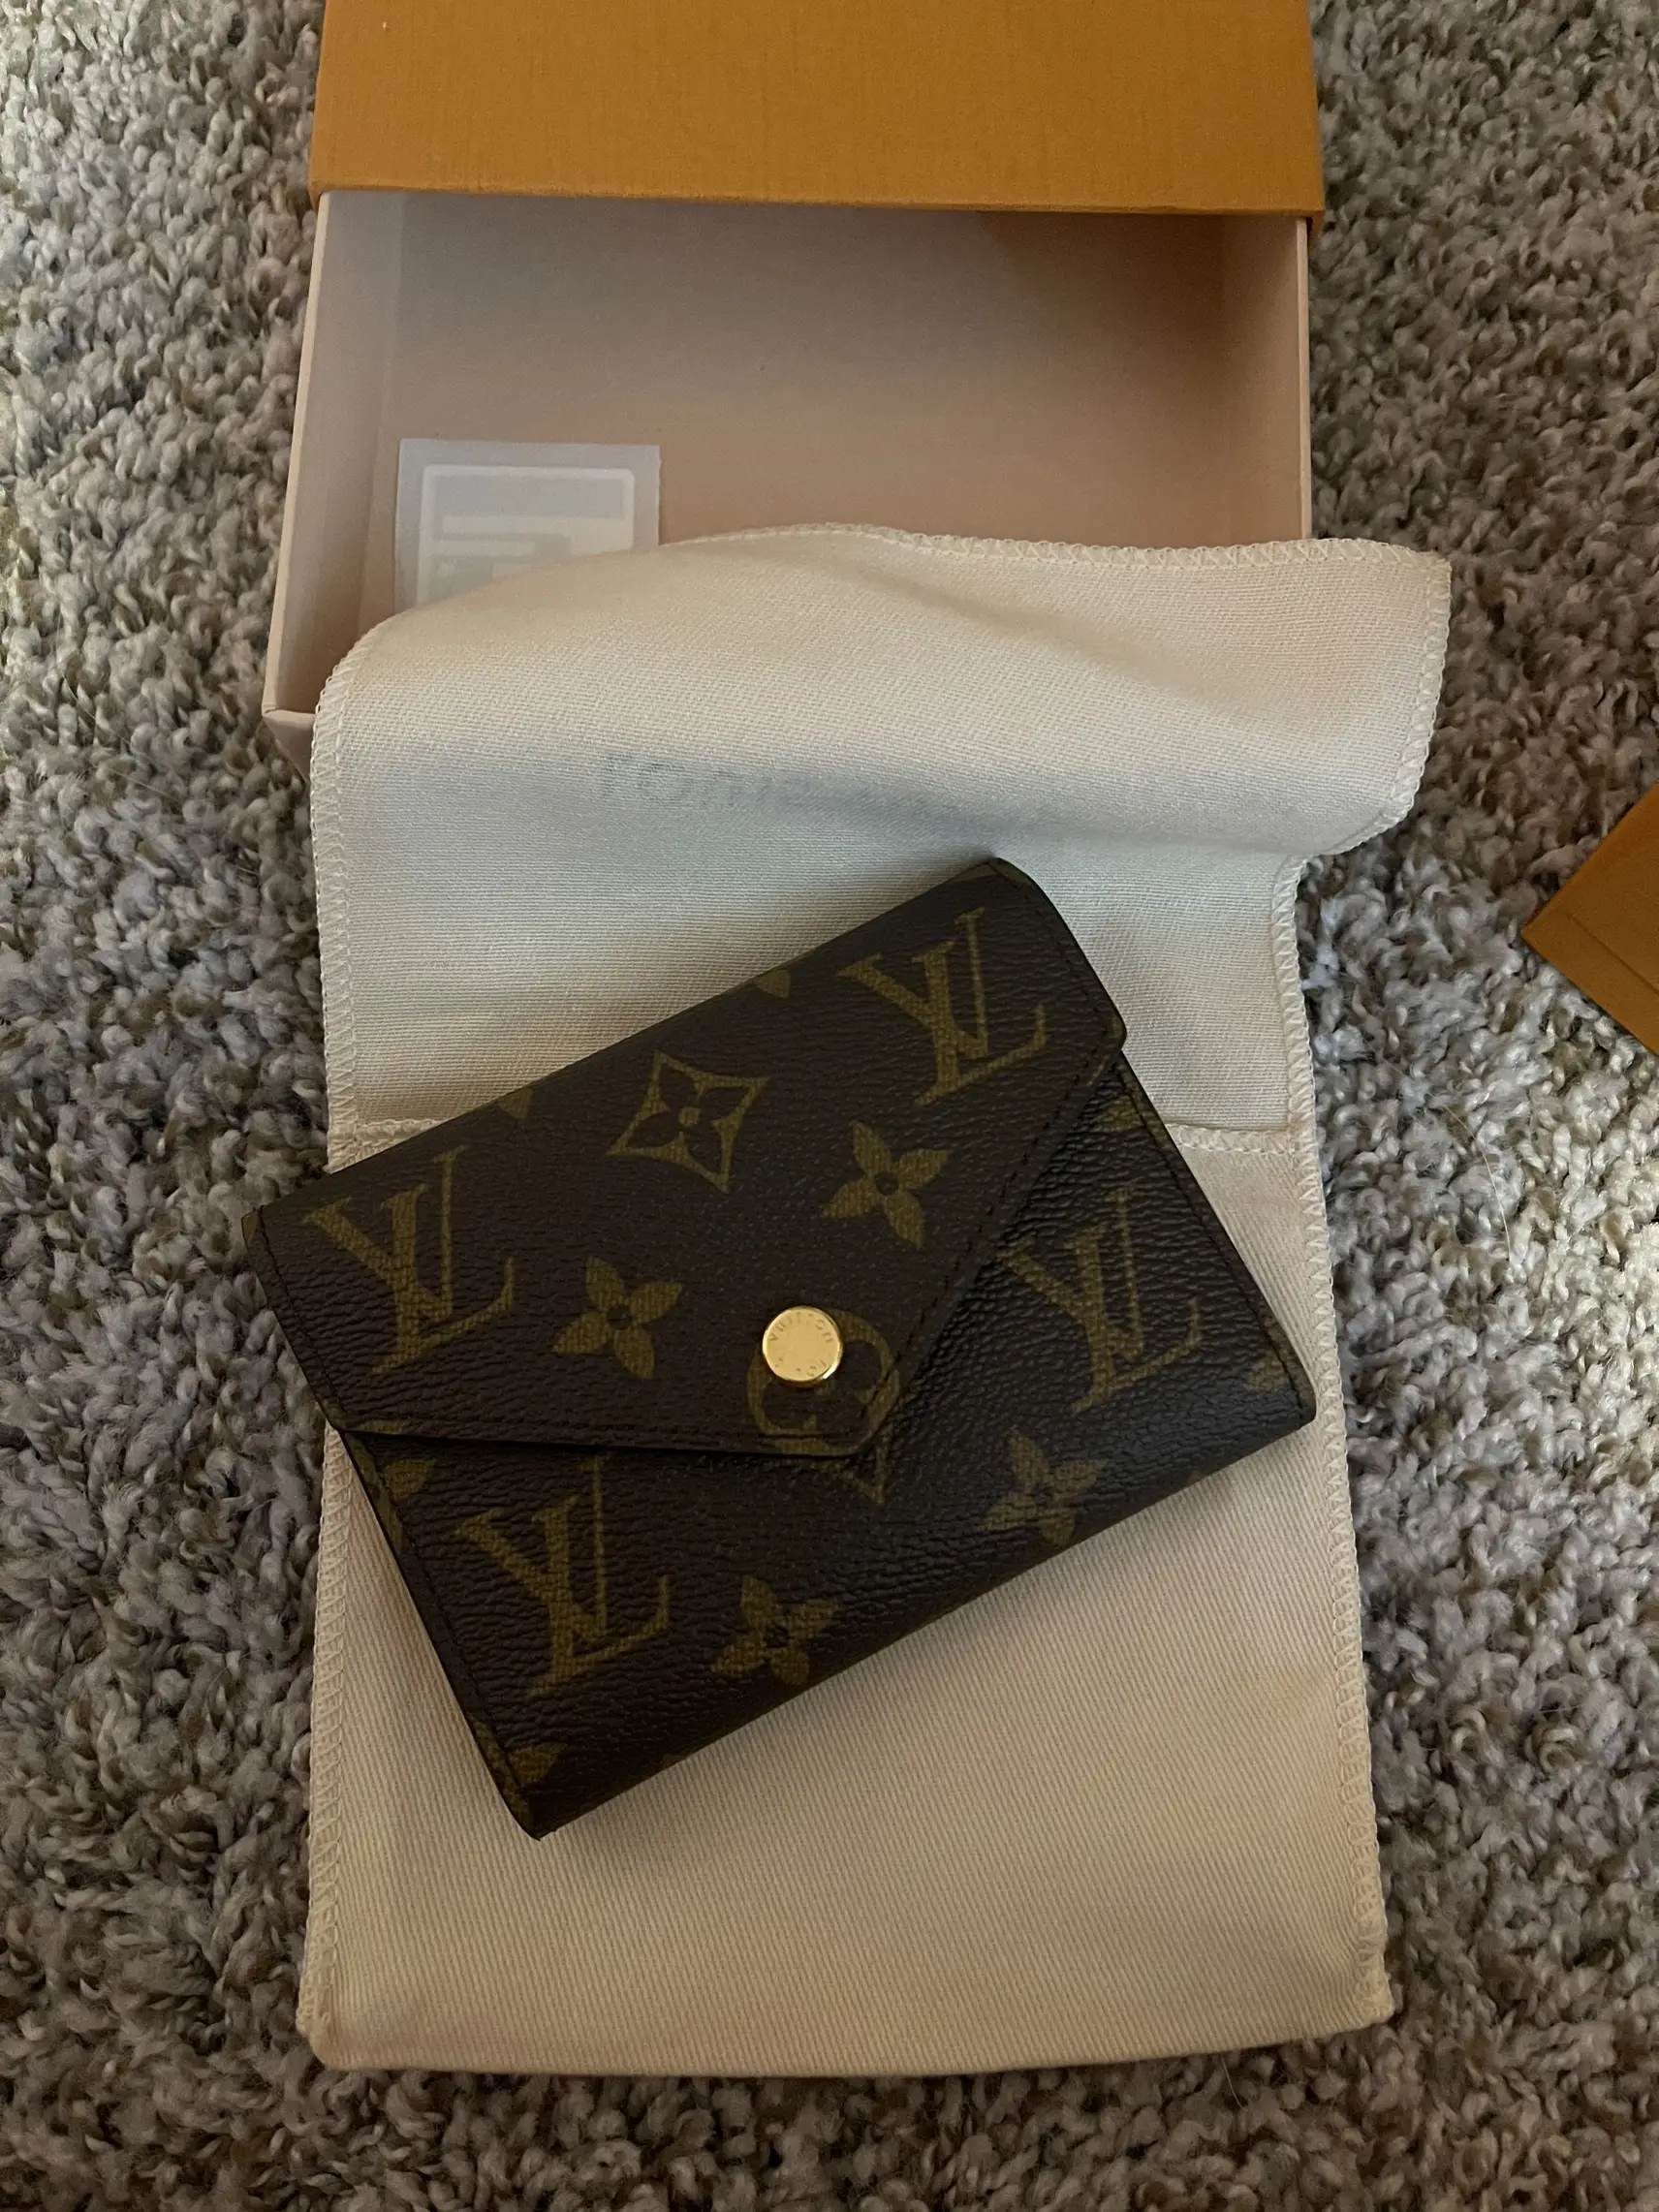 Unboxing with Louis Vuitton  This season, lovingly-selected